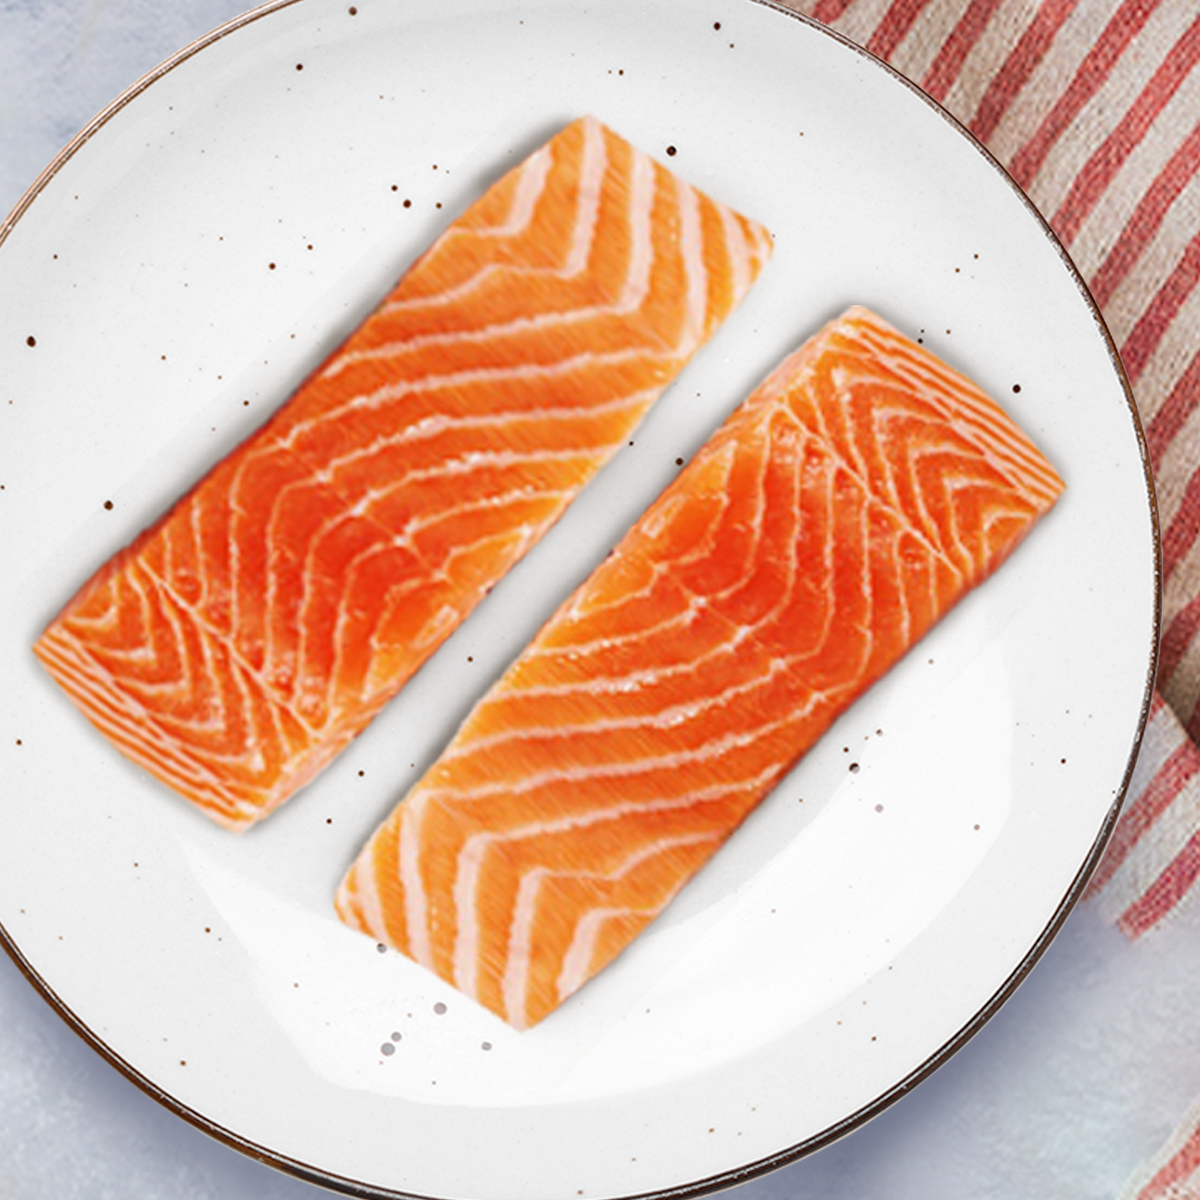 This image shows 2 8oz Atlantic Salmon Filets plated and ready to be prepared however you may choose